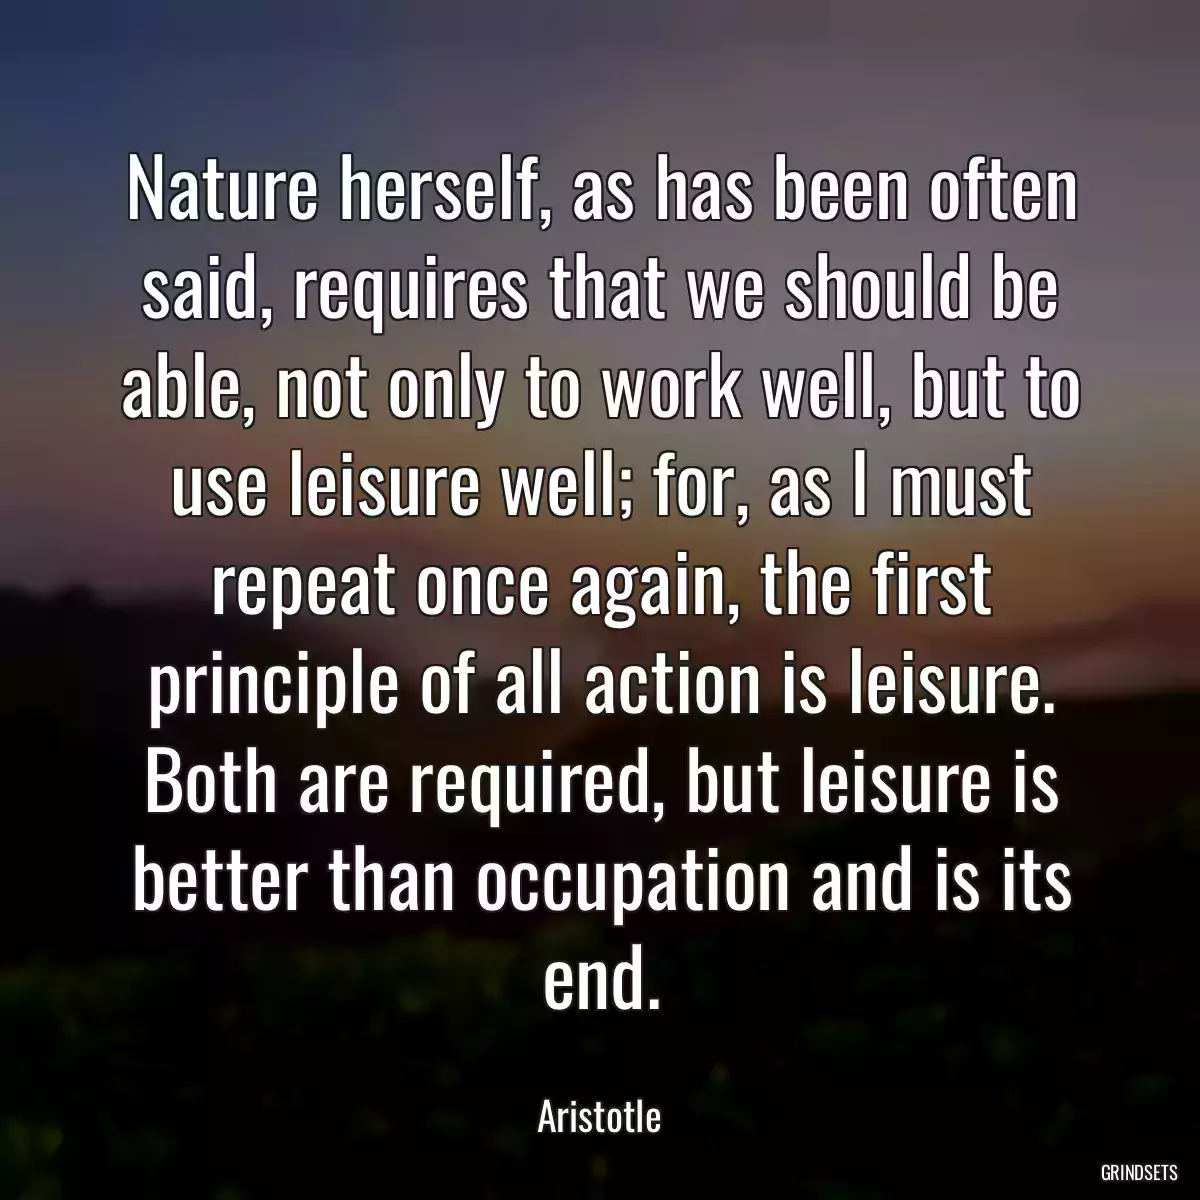 Nature herself, as has been often said, requires that we should be able, not only to work well, but to use leisure well; for, as I must repeat once again, the first principle of all action is leisure. Both are required, but leisure is better than occupation and is its end.